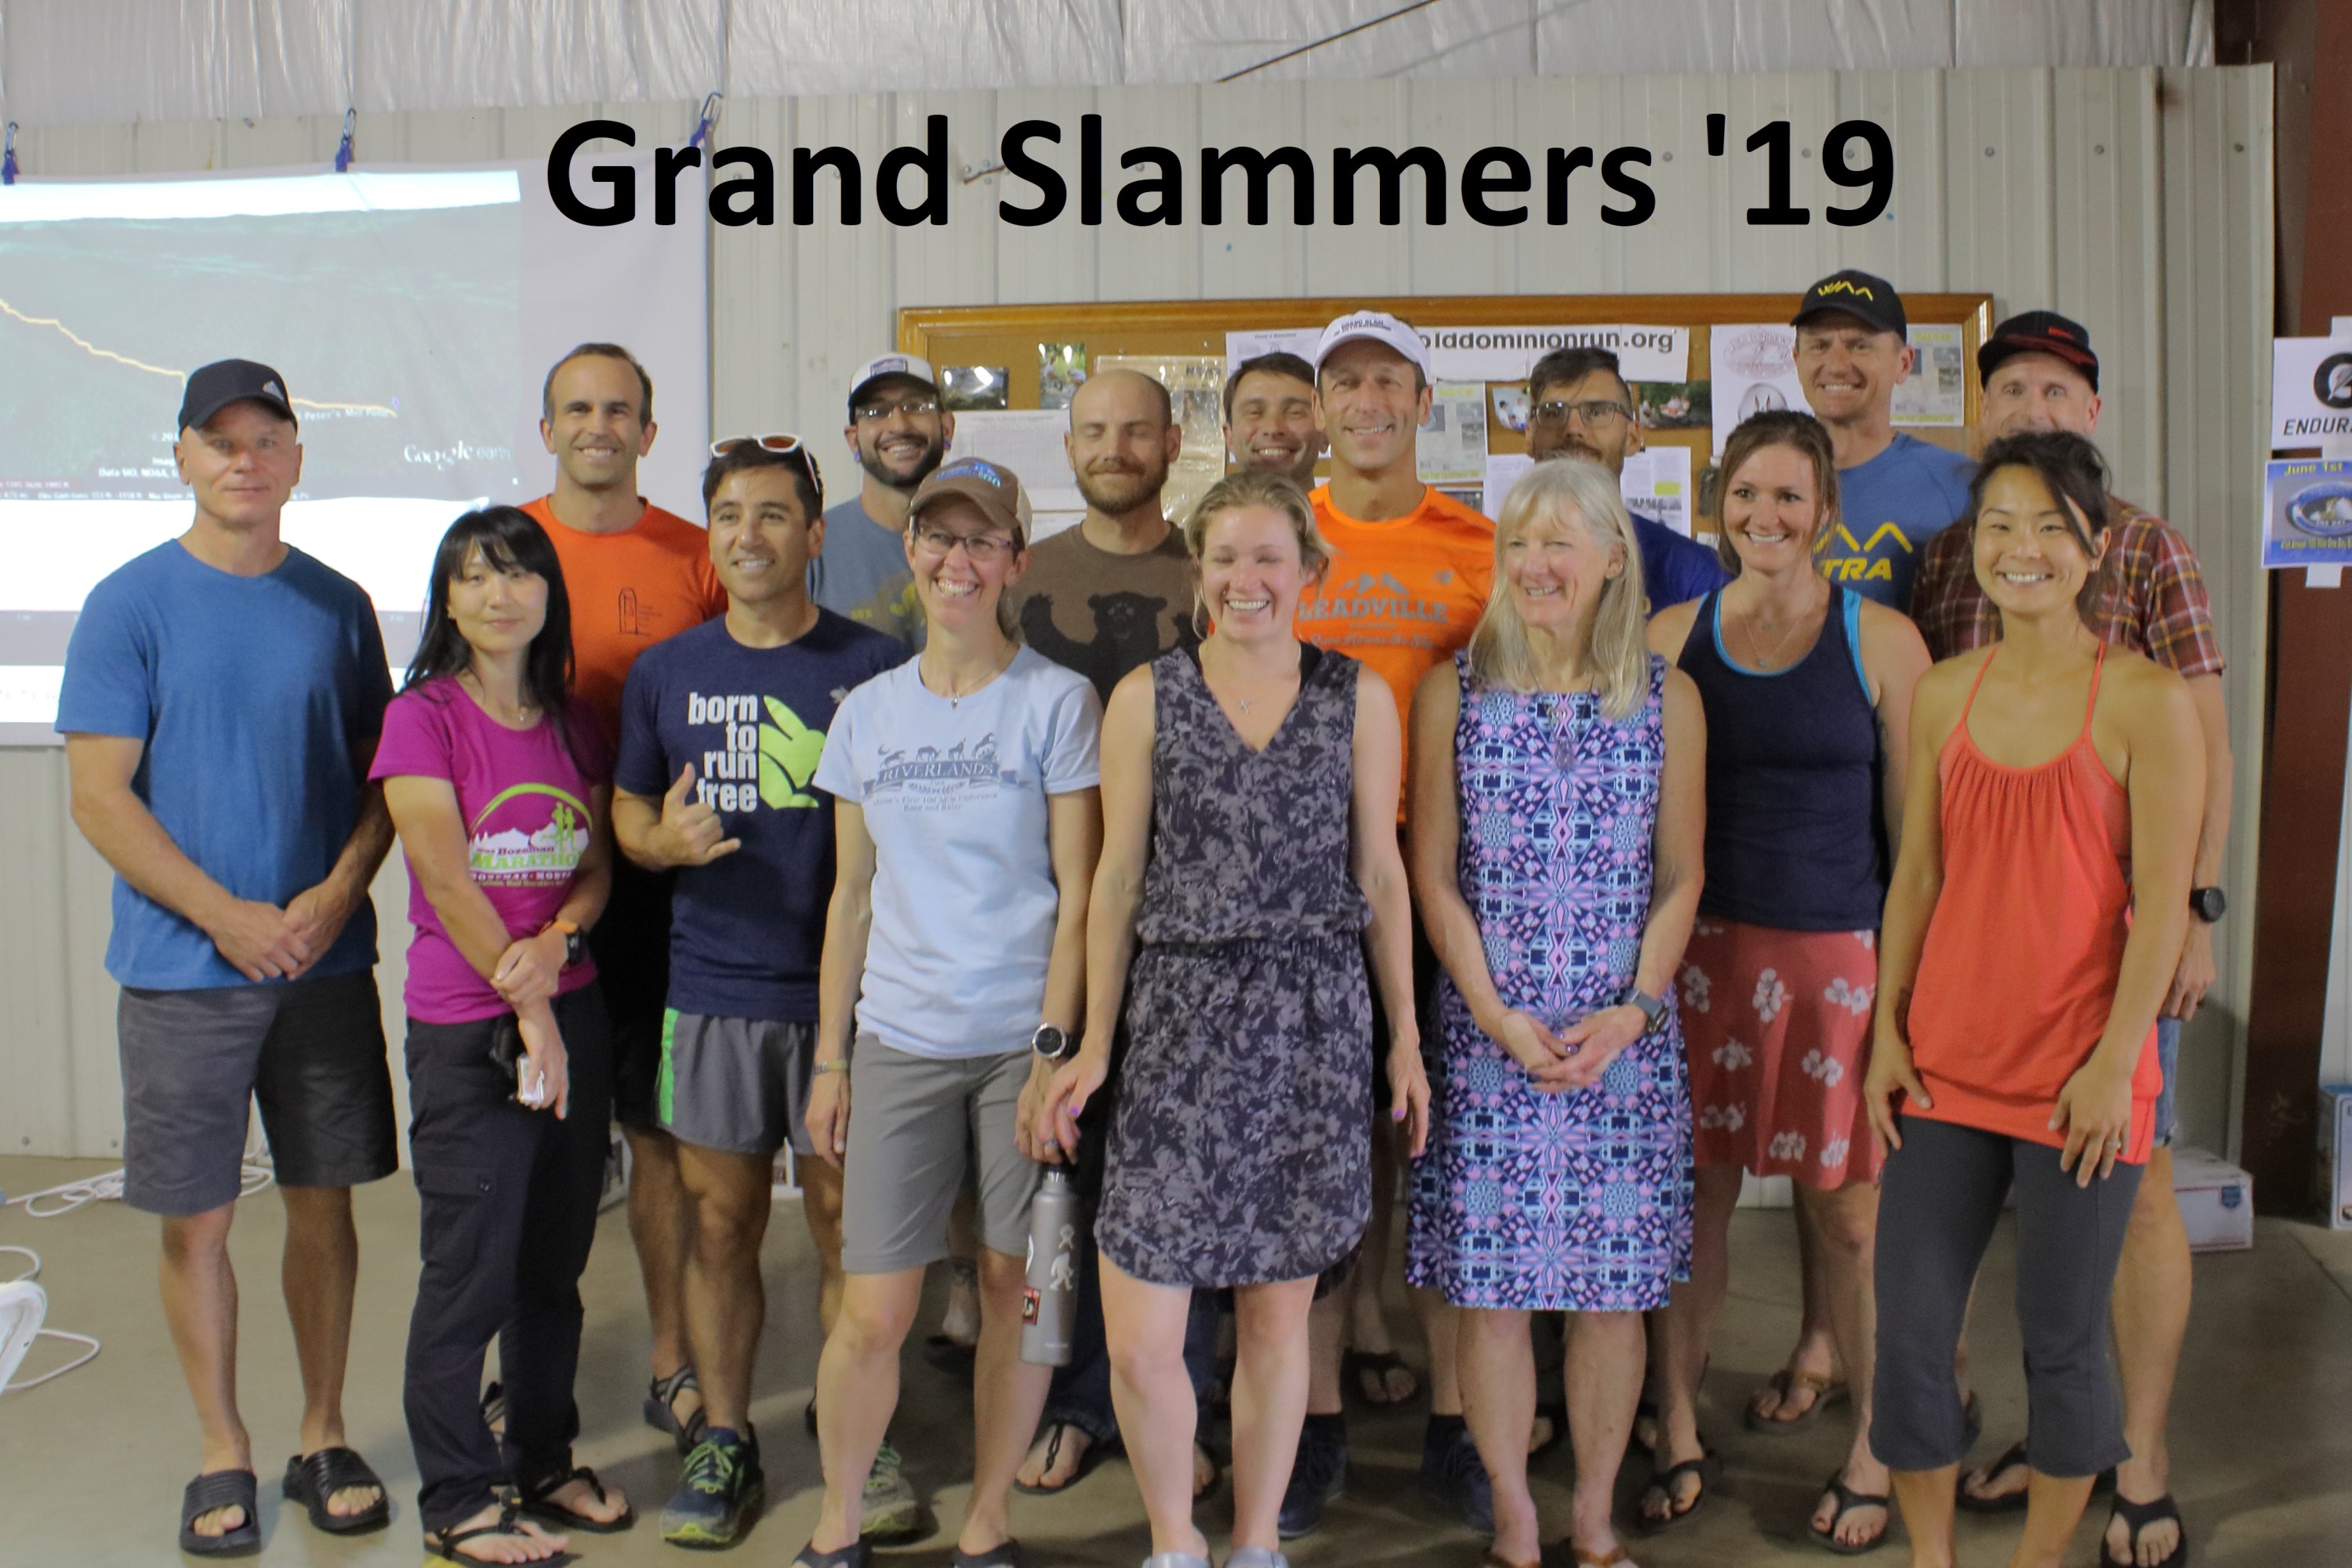 Group photo of the Grand Slammers